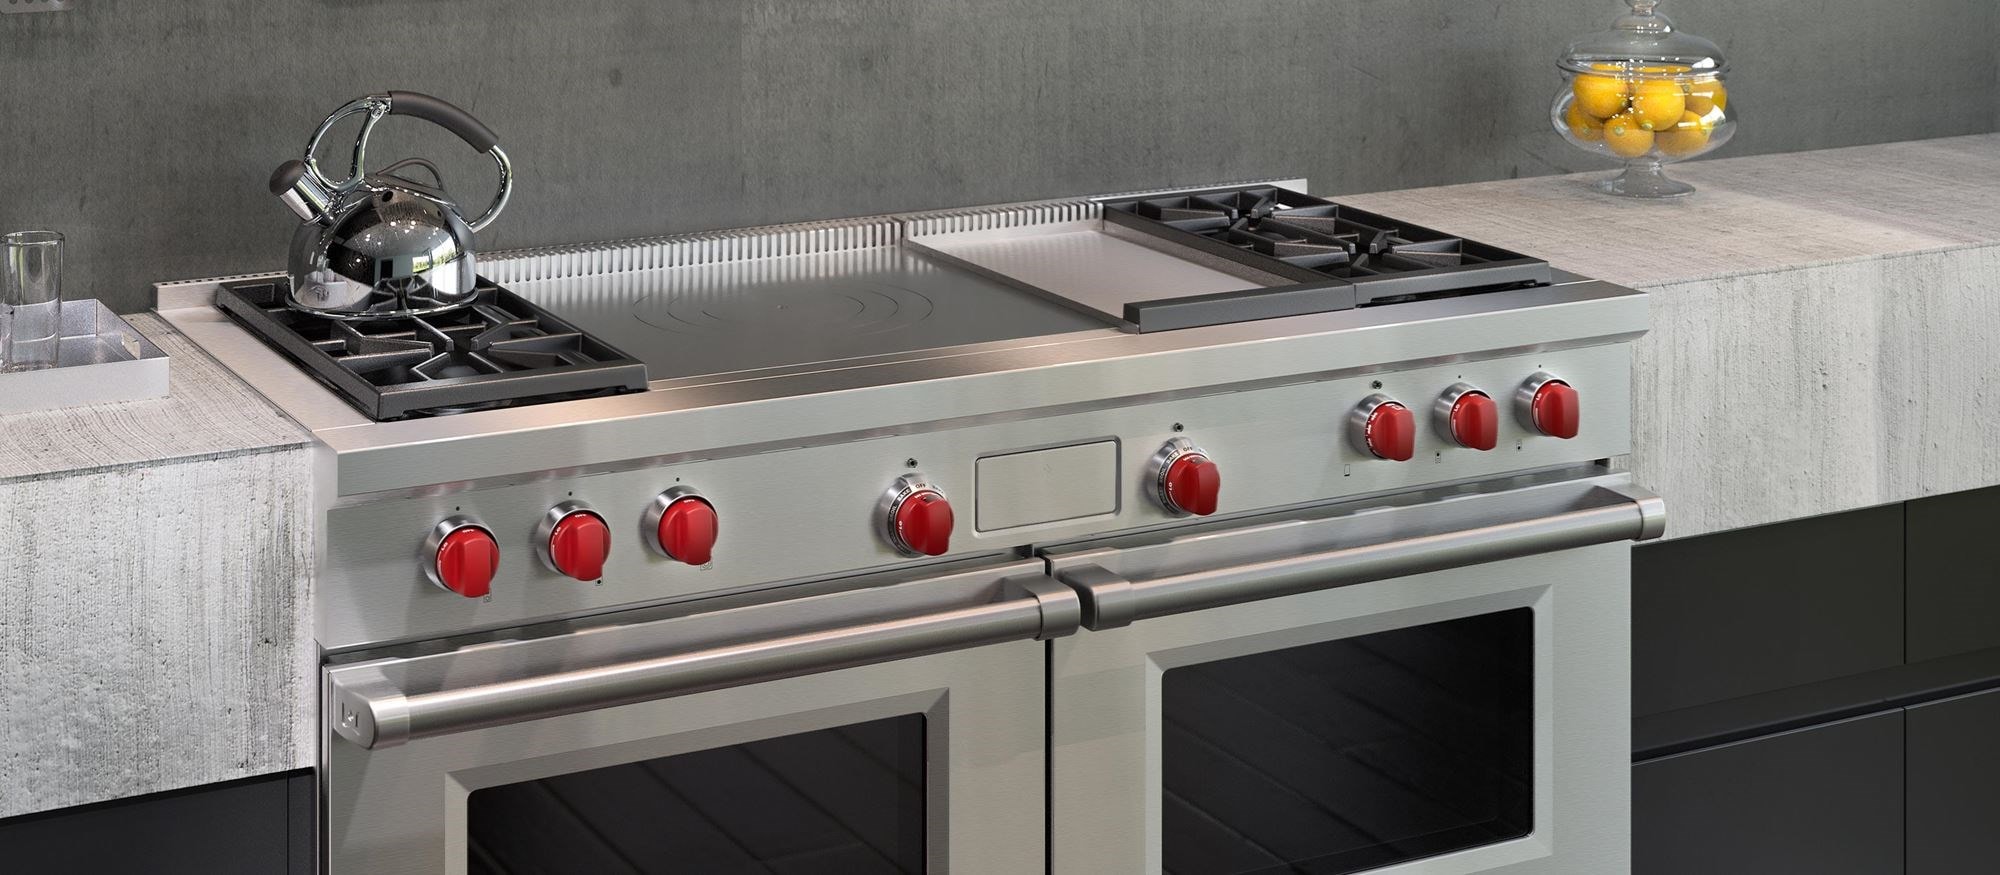 Legacy Model - 60 Dual Fuel Range - 4 Burners, Infrared Griddle and French  Top